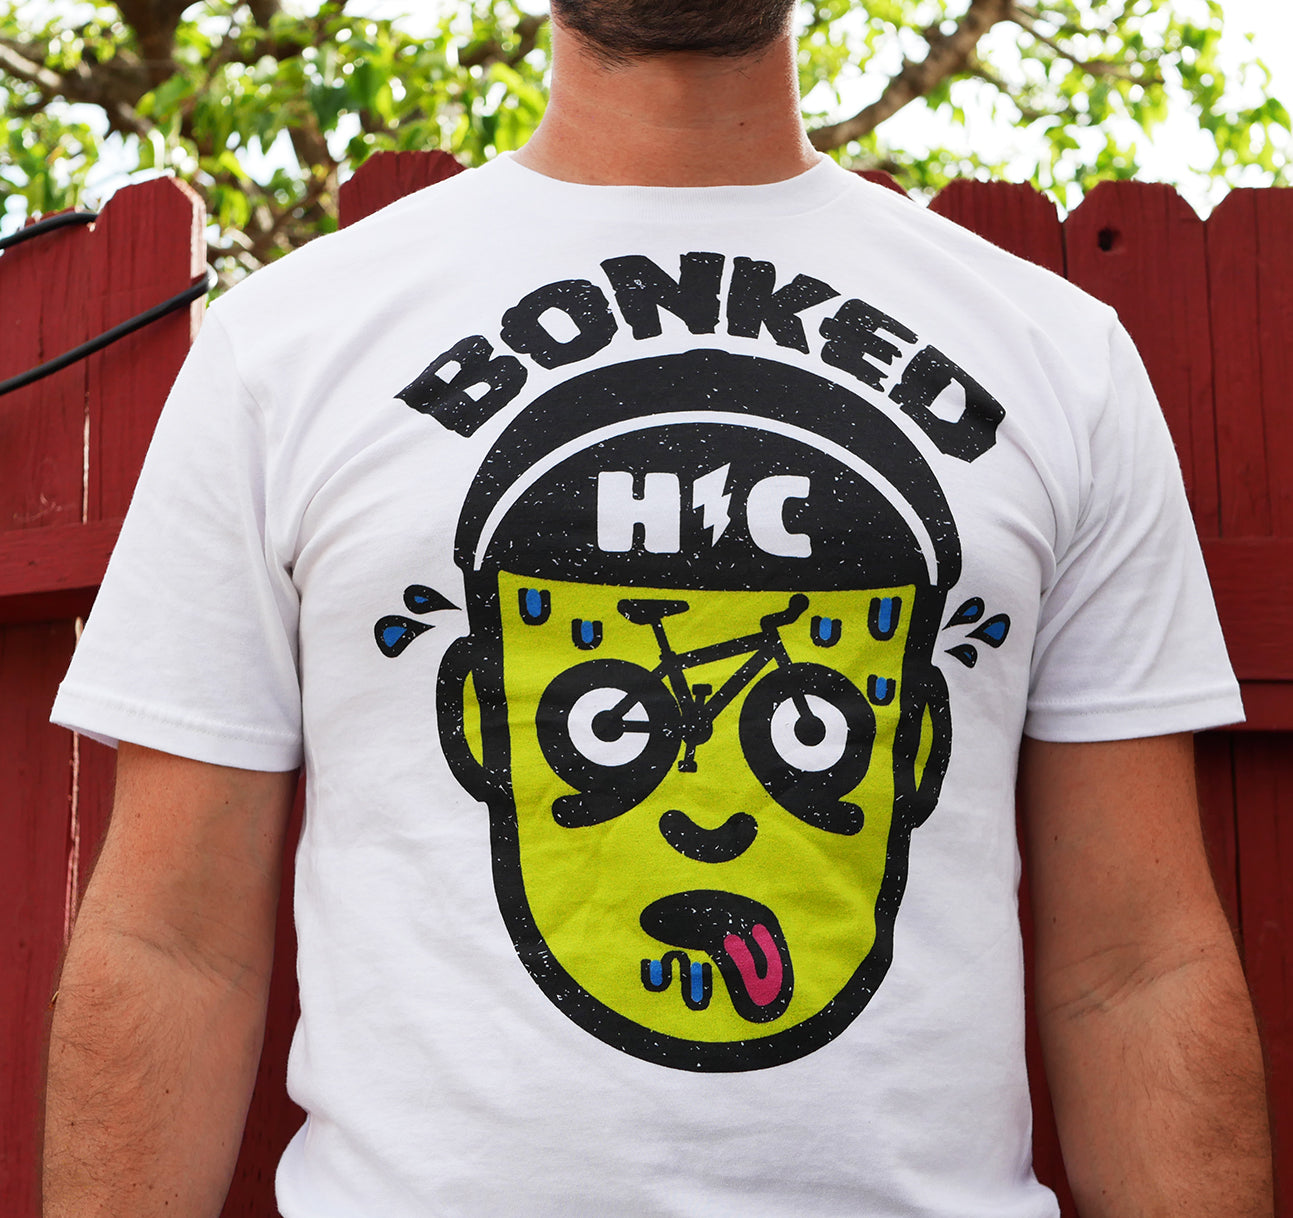 SMALL "Bonked" LIMITED EDITION Color Print White T - LAST IN STOCK